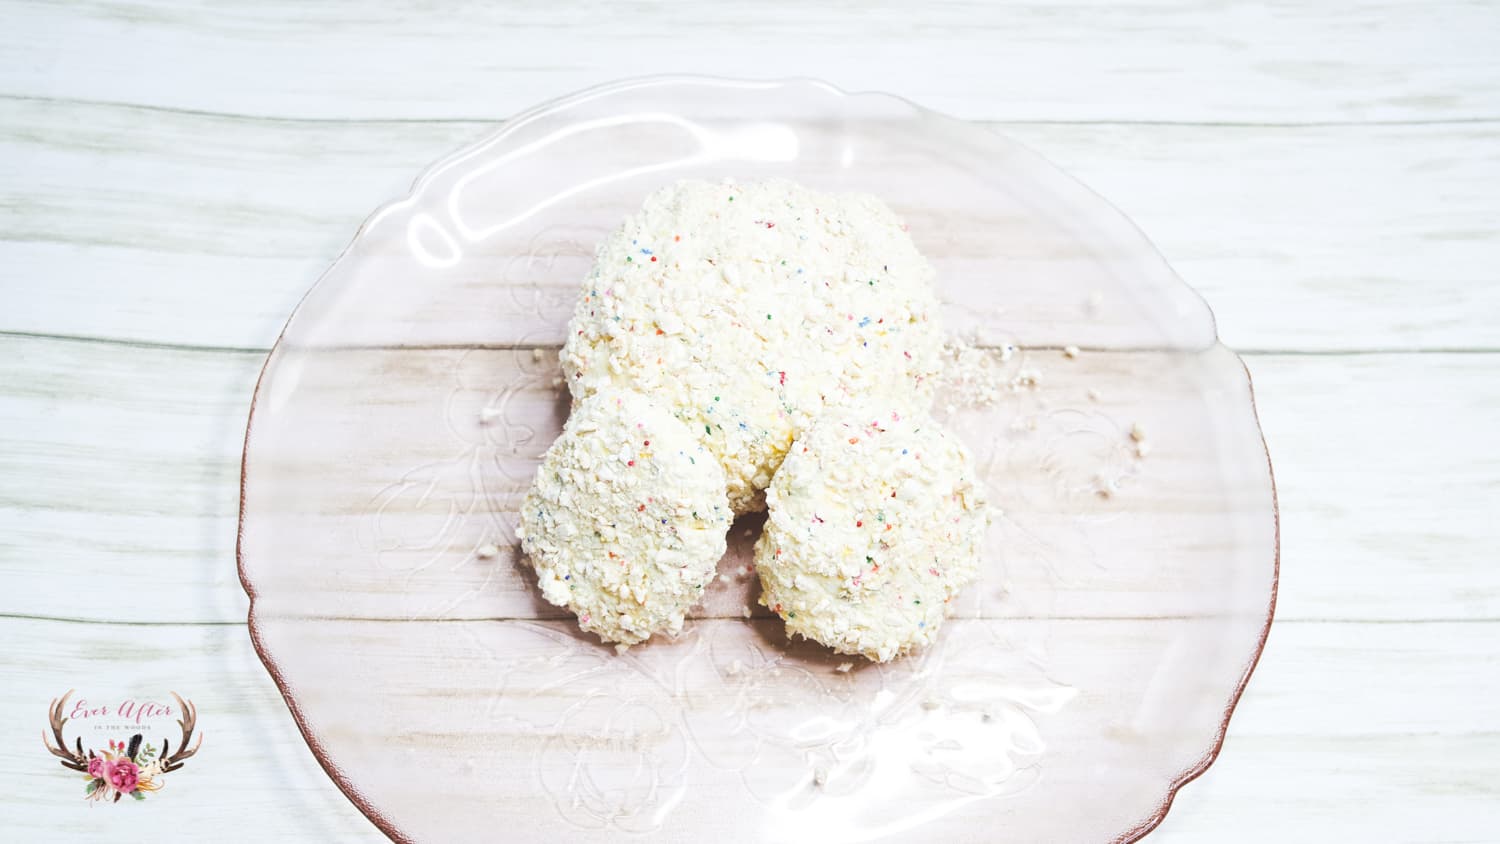 Bunny Butt Cheese Ball with Cotton Candy